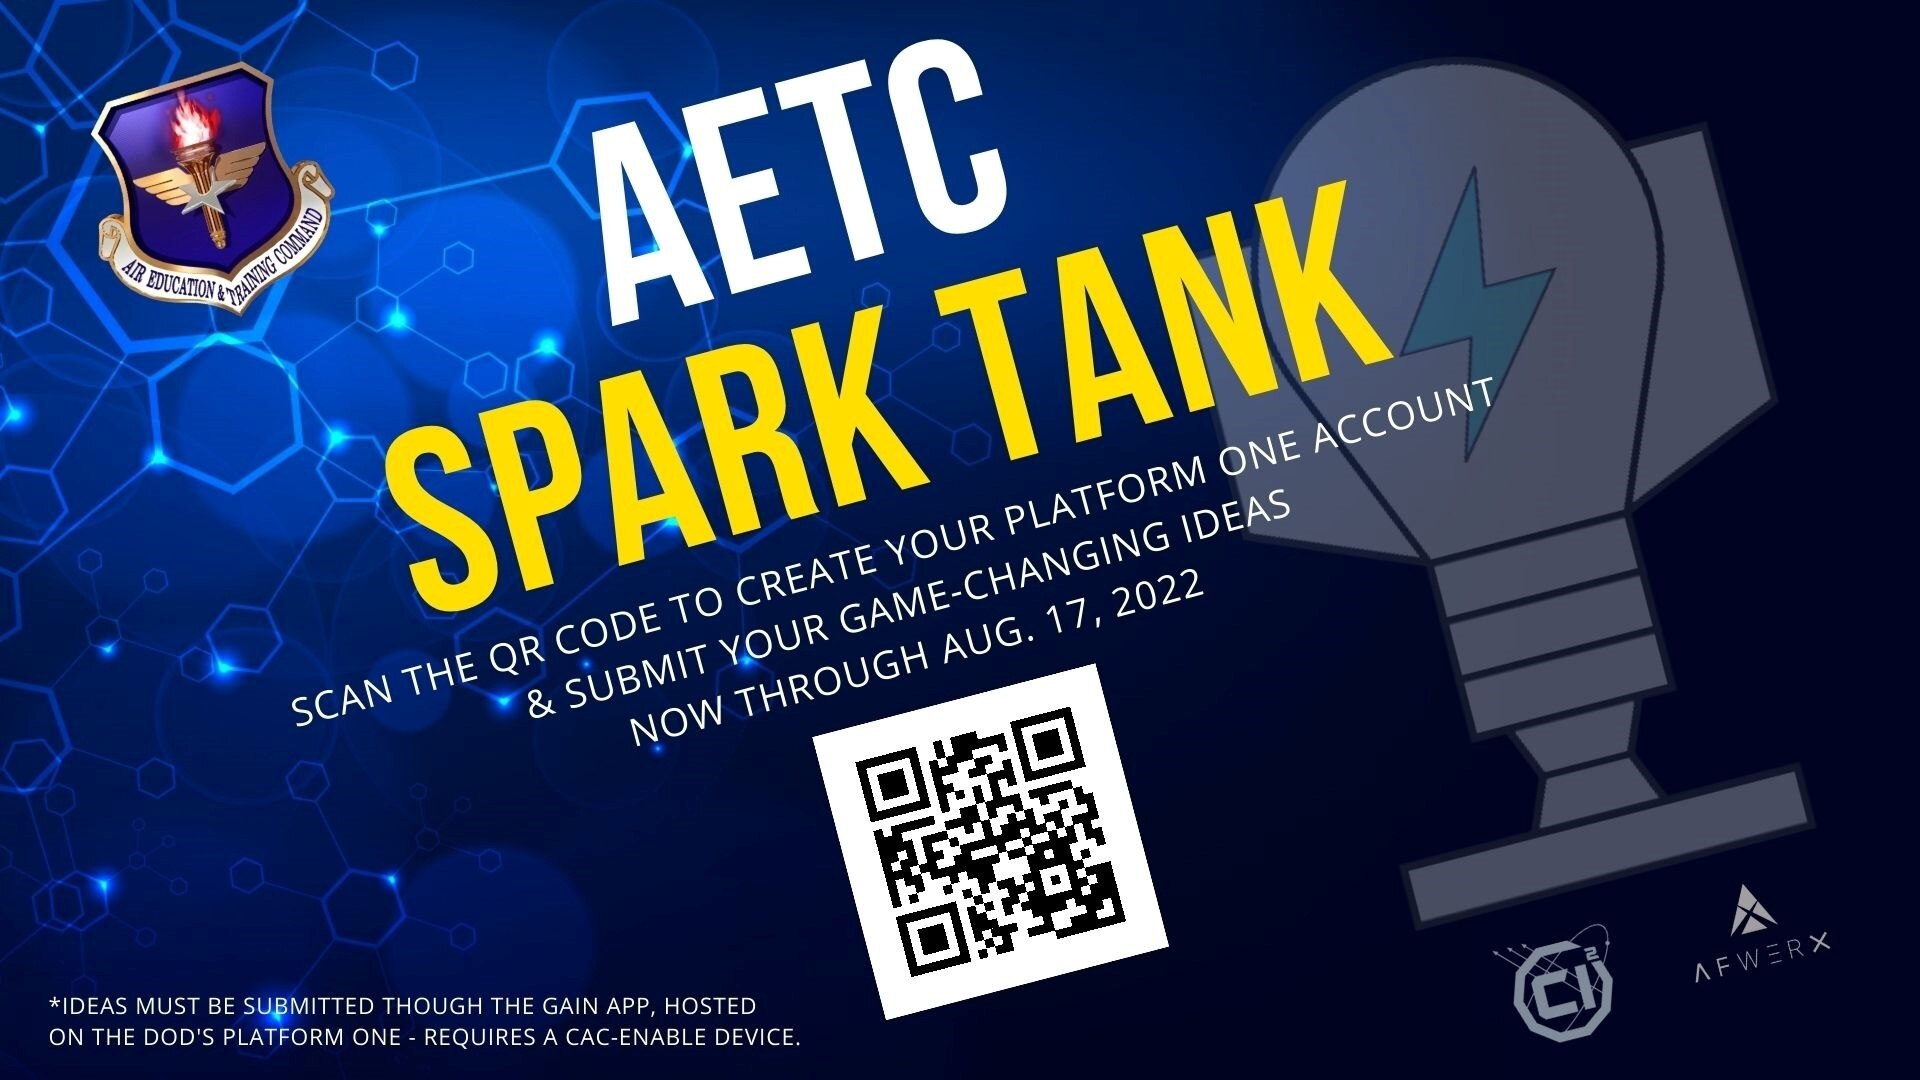 Air Force Spark Tank unleashes AETC's capacity to innovate